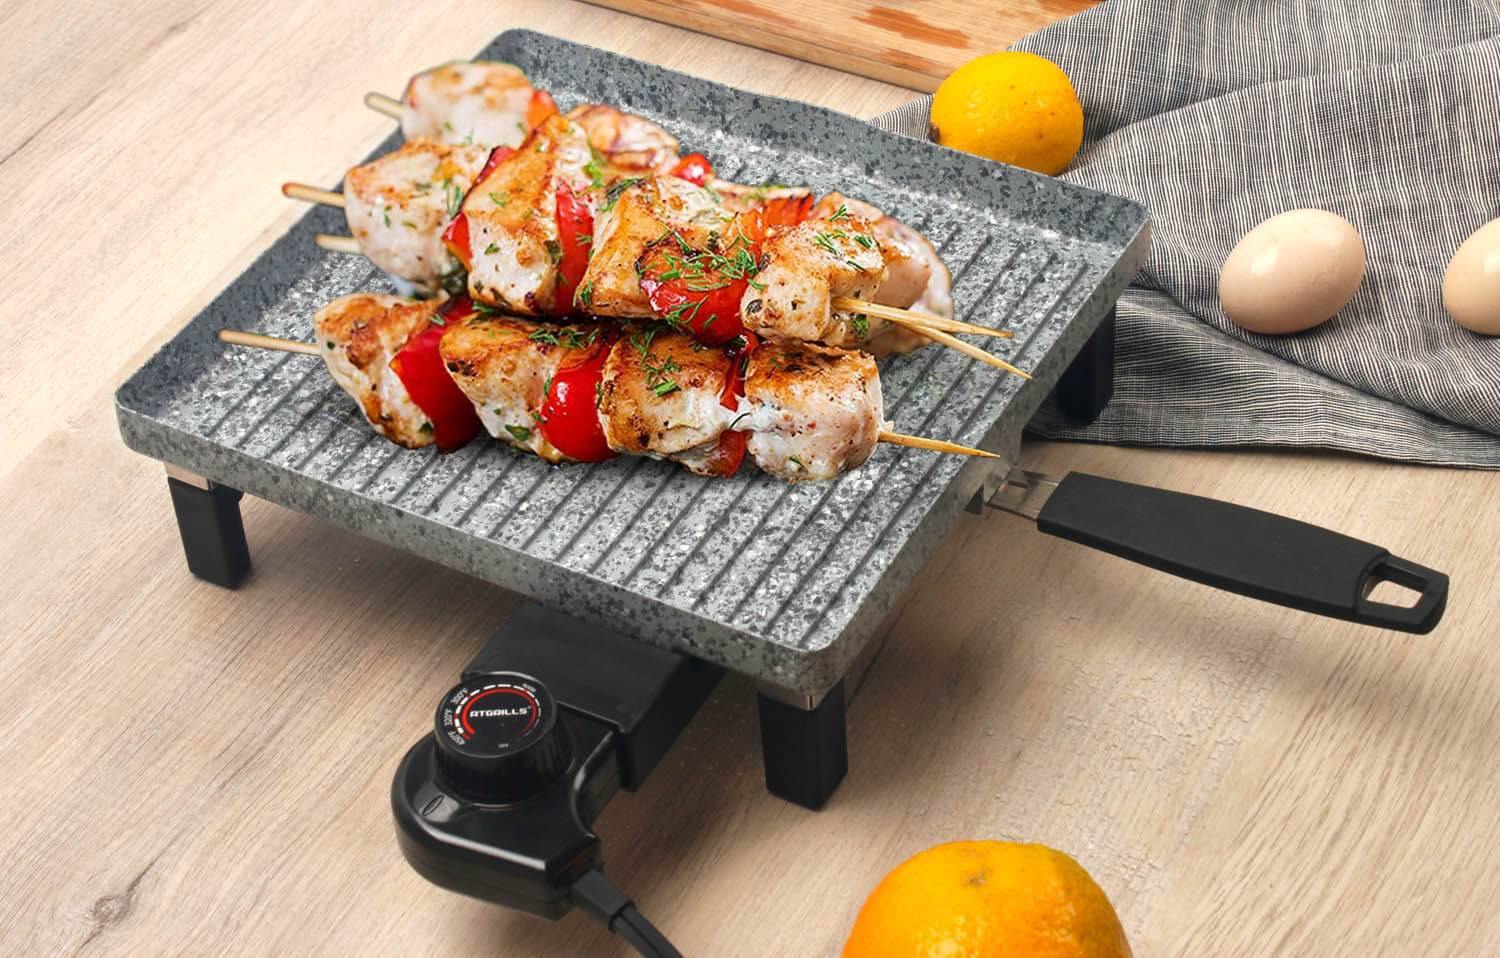 Food on Atgrills electric grill pan